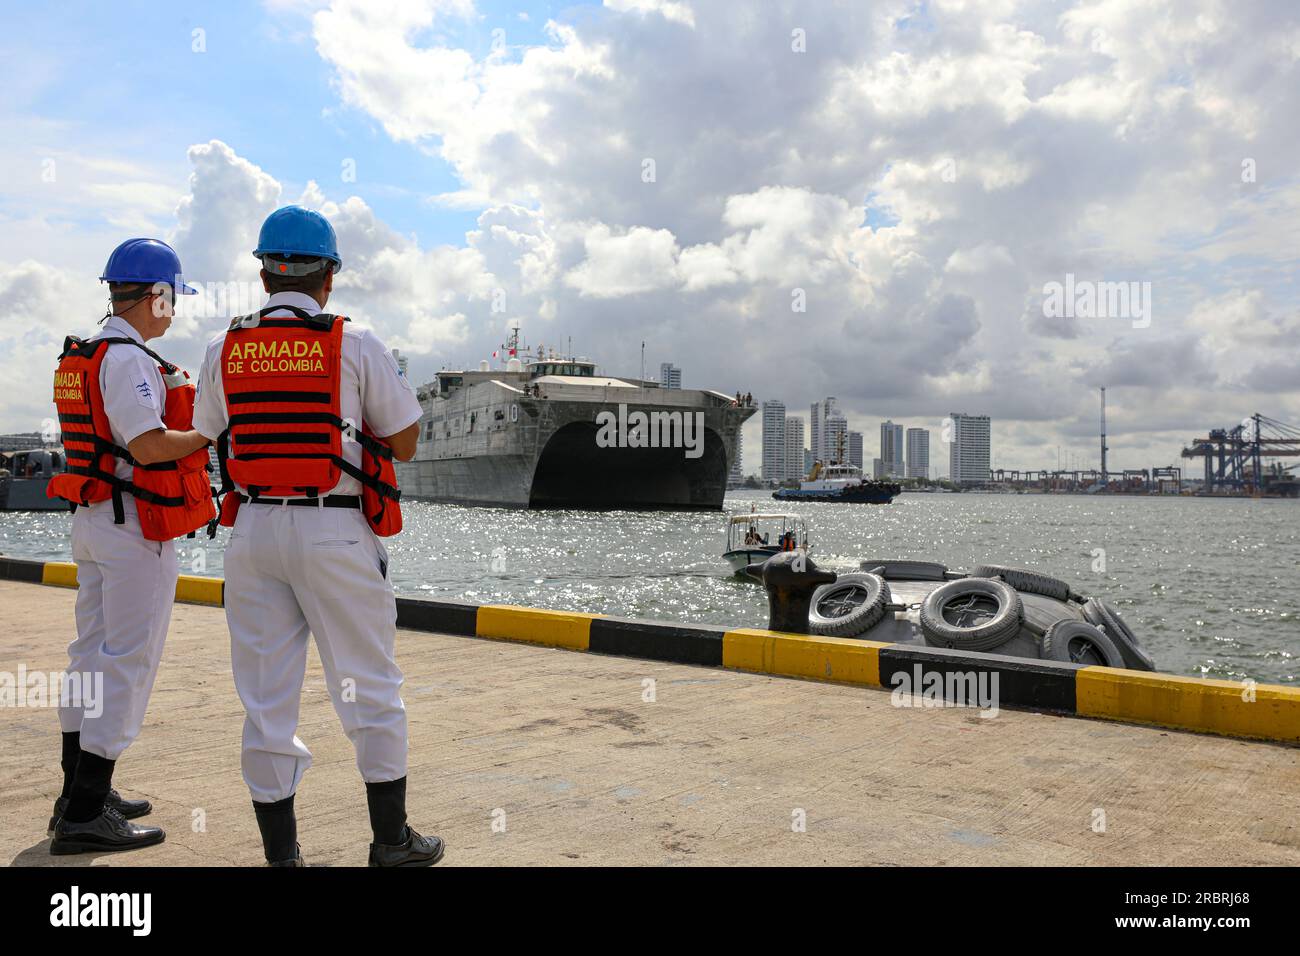 20230701-N-EA586-1012  CARTAGENA, Colombia (July 2, 2023) Colombian Navy Sailors observe as the expeditionary fast transport USNS Burlington (T-EFP 10) arrives at Colombian Base Naval Logistica ARC 'Bolivar', Colombia in preparation for UNITAS LXIV, July 2, 2023. Burlington is one of 26 vessels slated to participate in UNITAS LXIV, the world’s longest running maritime exercise, July 11-21. Colombia is hosting UNITAS LXIV this year with nearly 7,000 people from 20 nations. (U.S. Navy photo by Lt.j.g. Nicko West/Released) Stock Photo